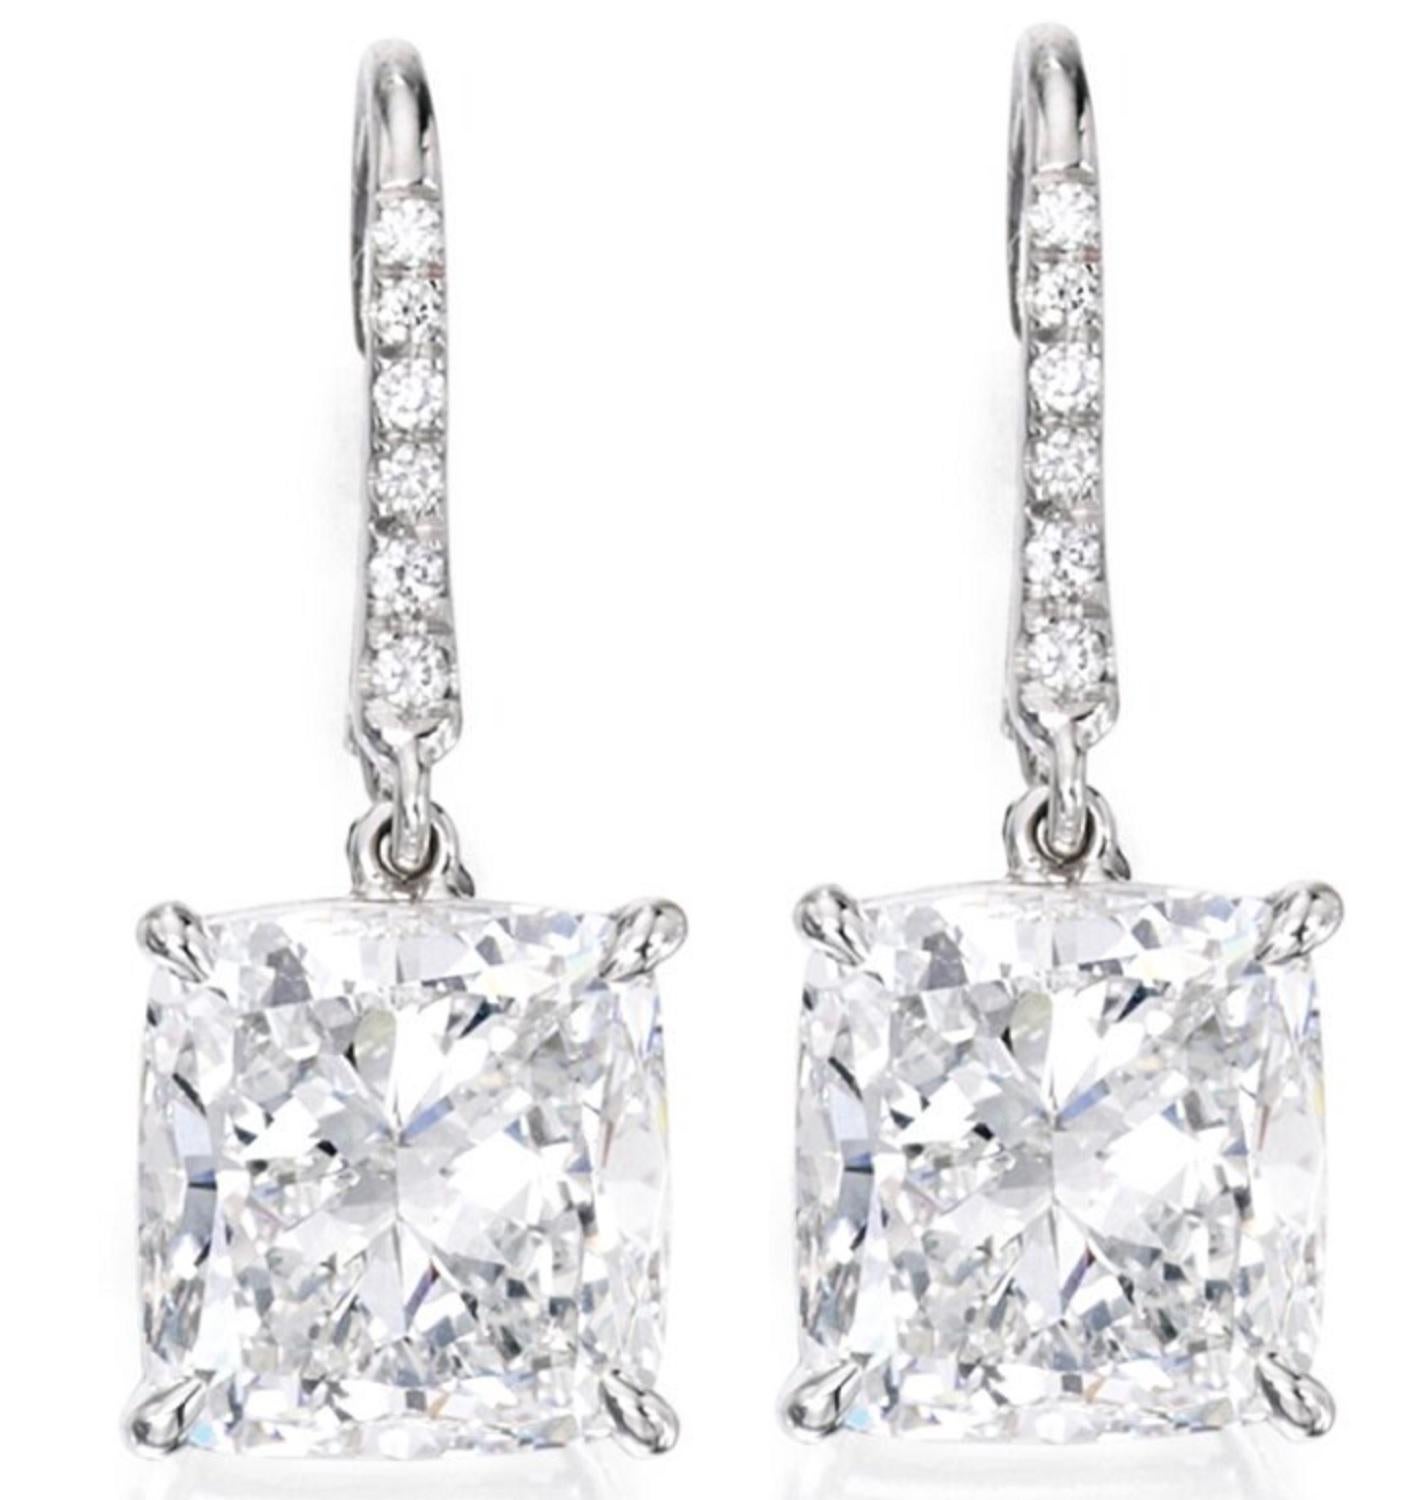 This exquisite diamond dangle earrings are composed by two GIA Certified 4.40 Carat Cushion Modified Brilliant Cut Diamonds with great sparkle. The lovely earrings are set with a pave of natural diamonds and platinum mounting the diamond sum approx.